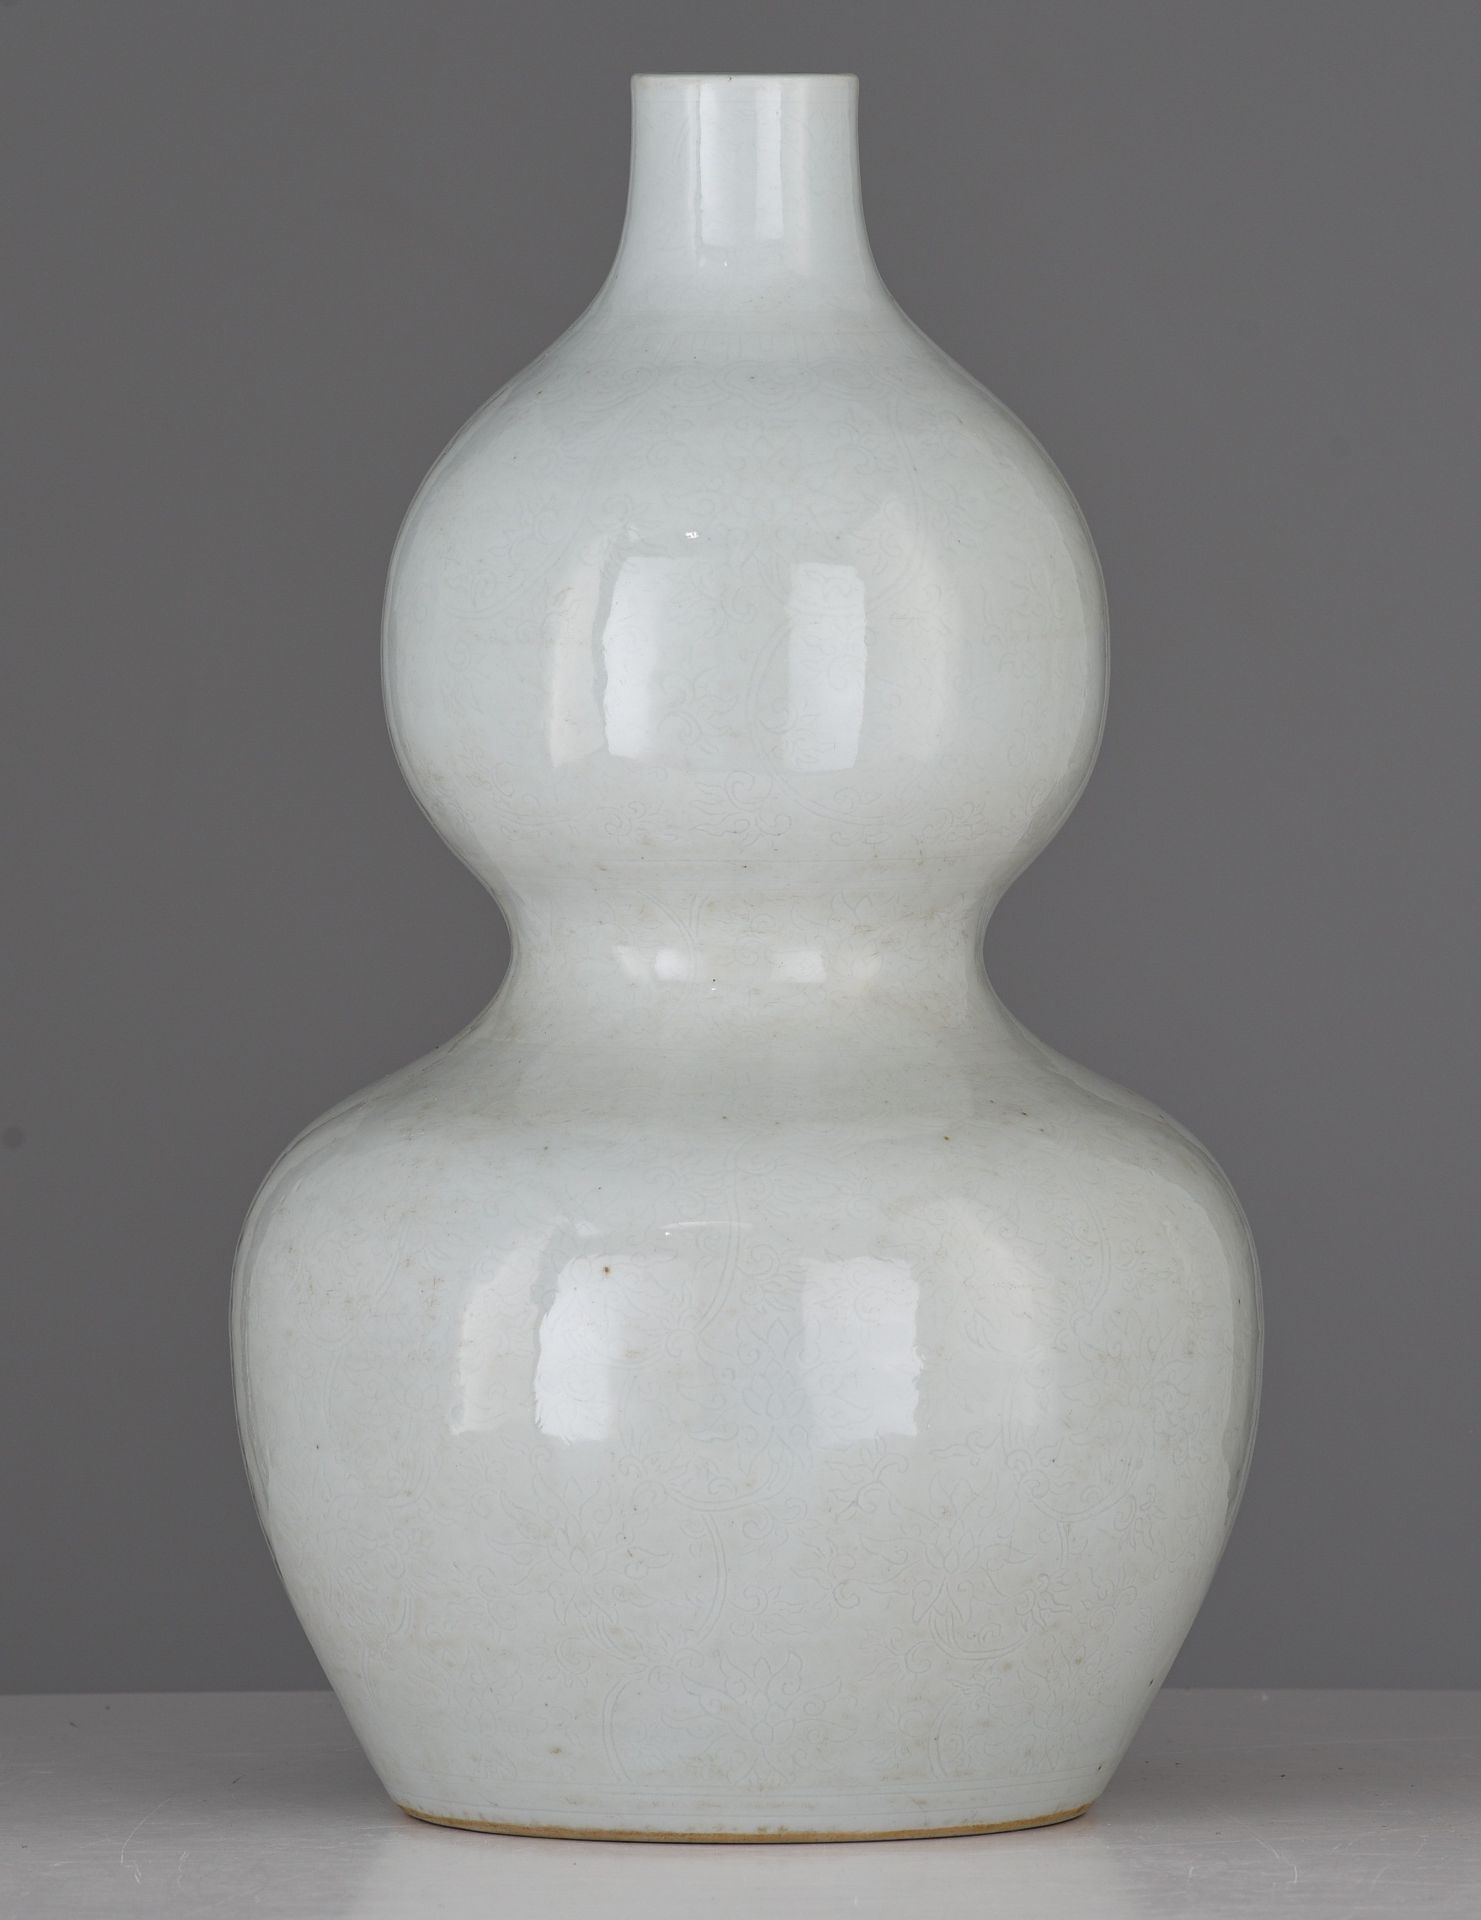 A Chinese anhua tianbai-glazed double-gourd vase, incised with 'Da Ming Wanli Nian Zhi' at the botto - Image 5 of 7